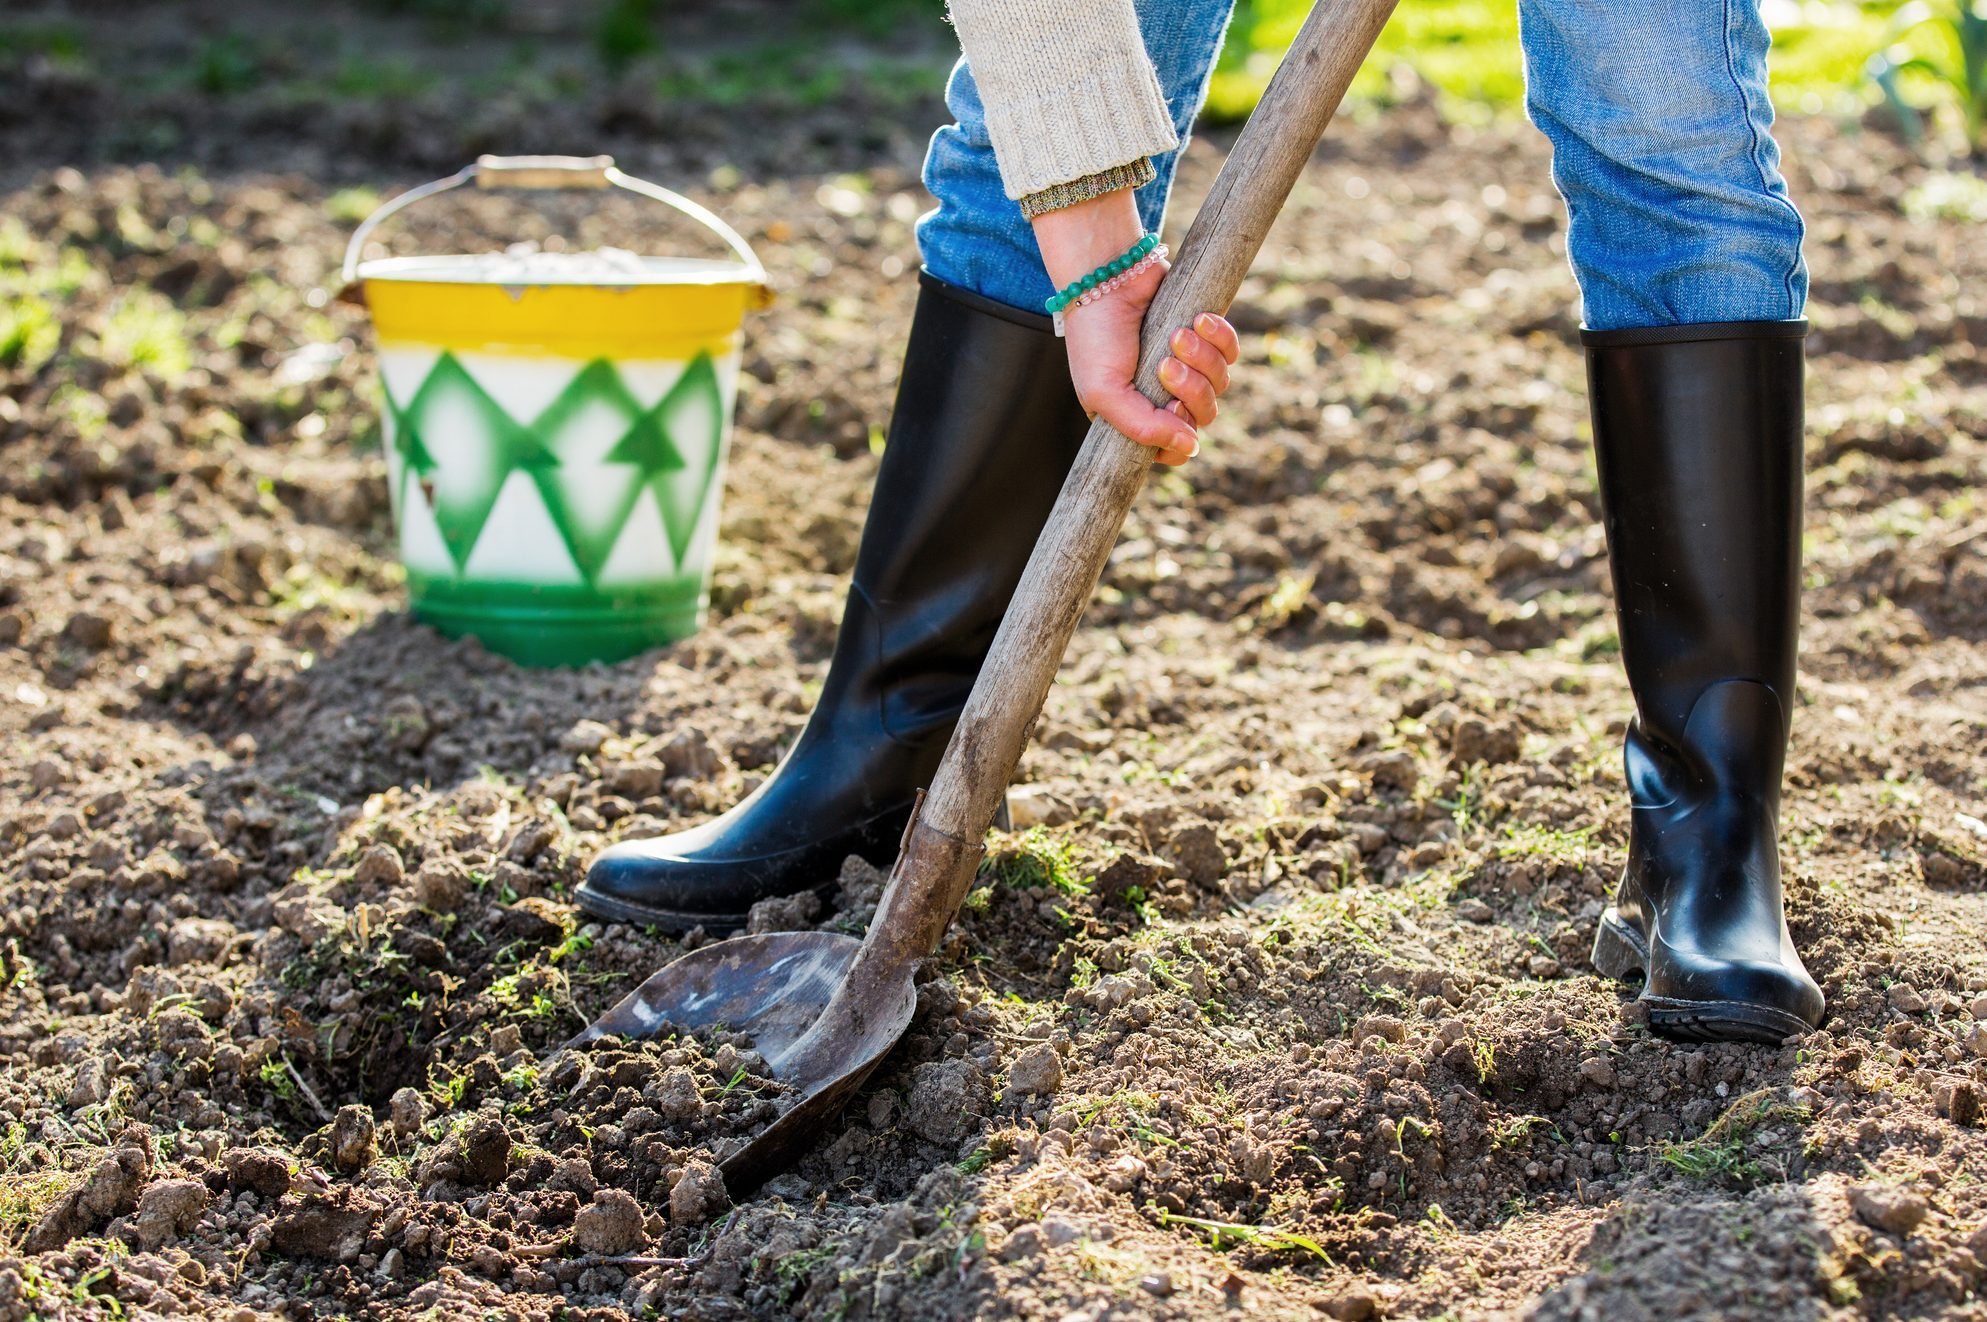 What To Know About Leveling a Yard